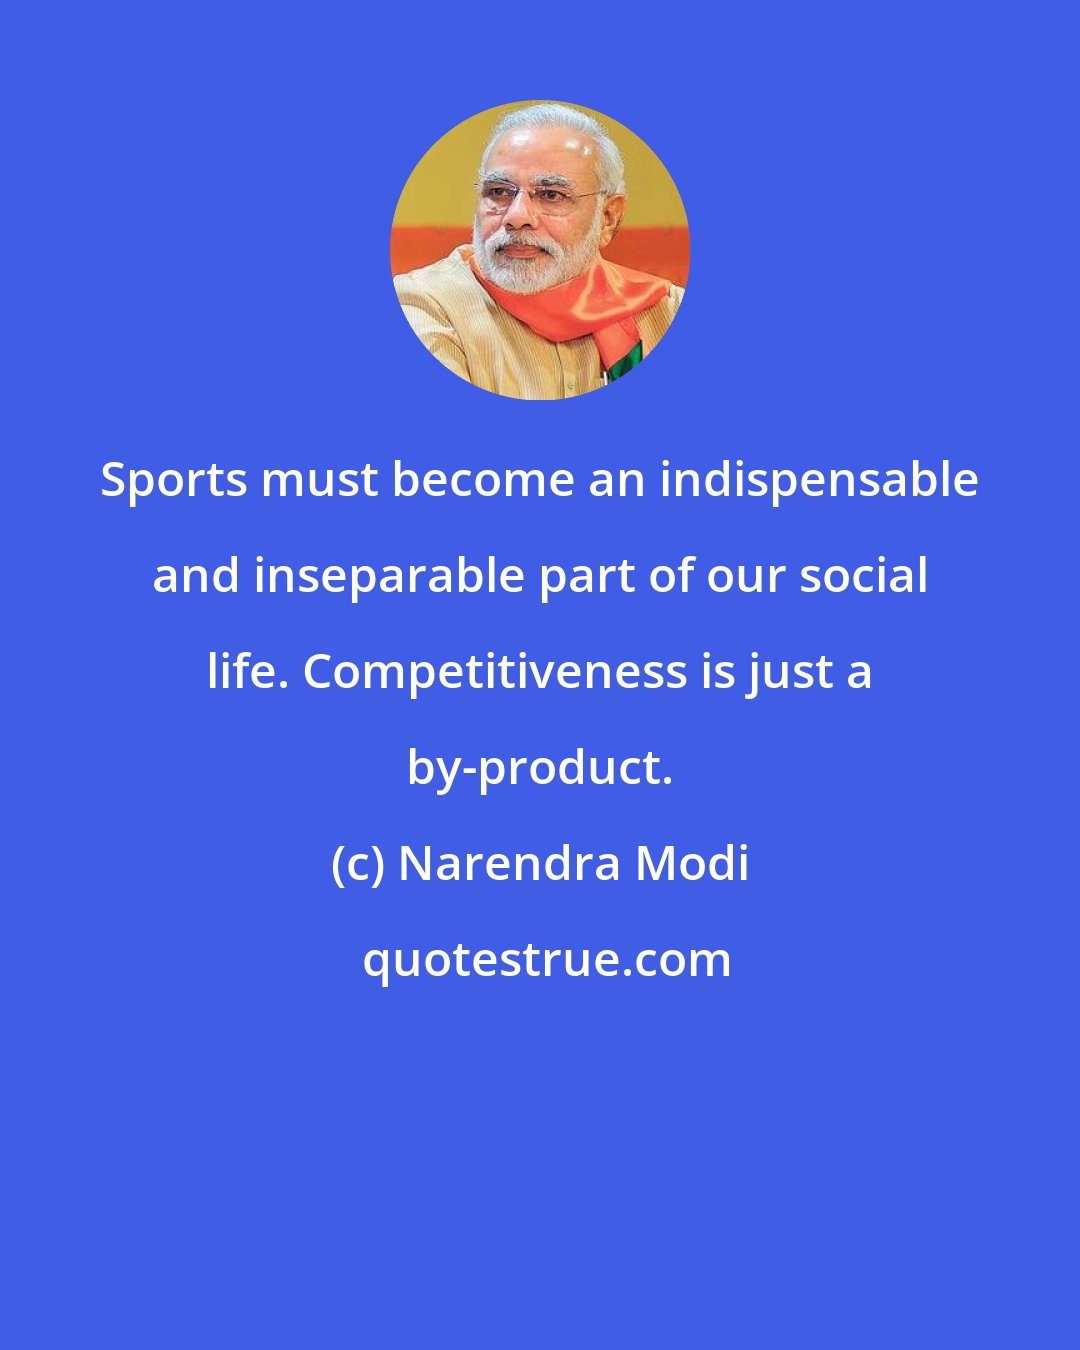 Narendra Modi: Sports must become an indispensable and inseparable part of our social life. Competitiveness is just a by-product.